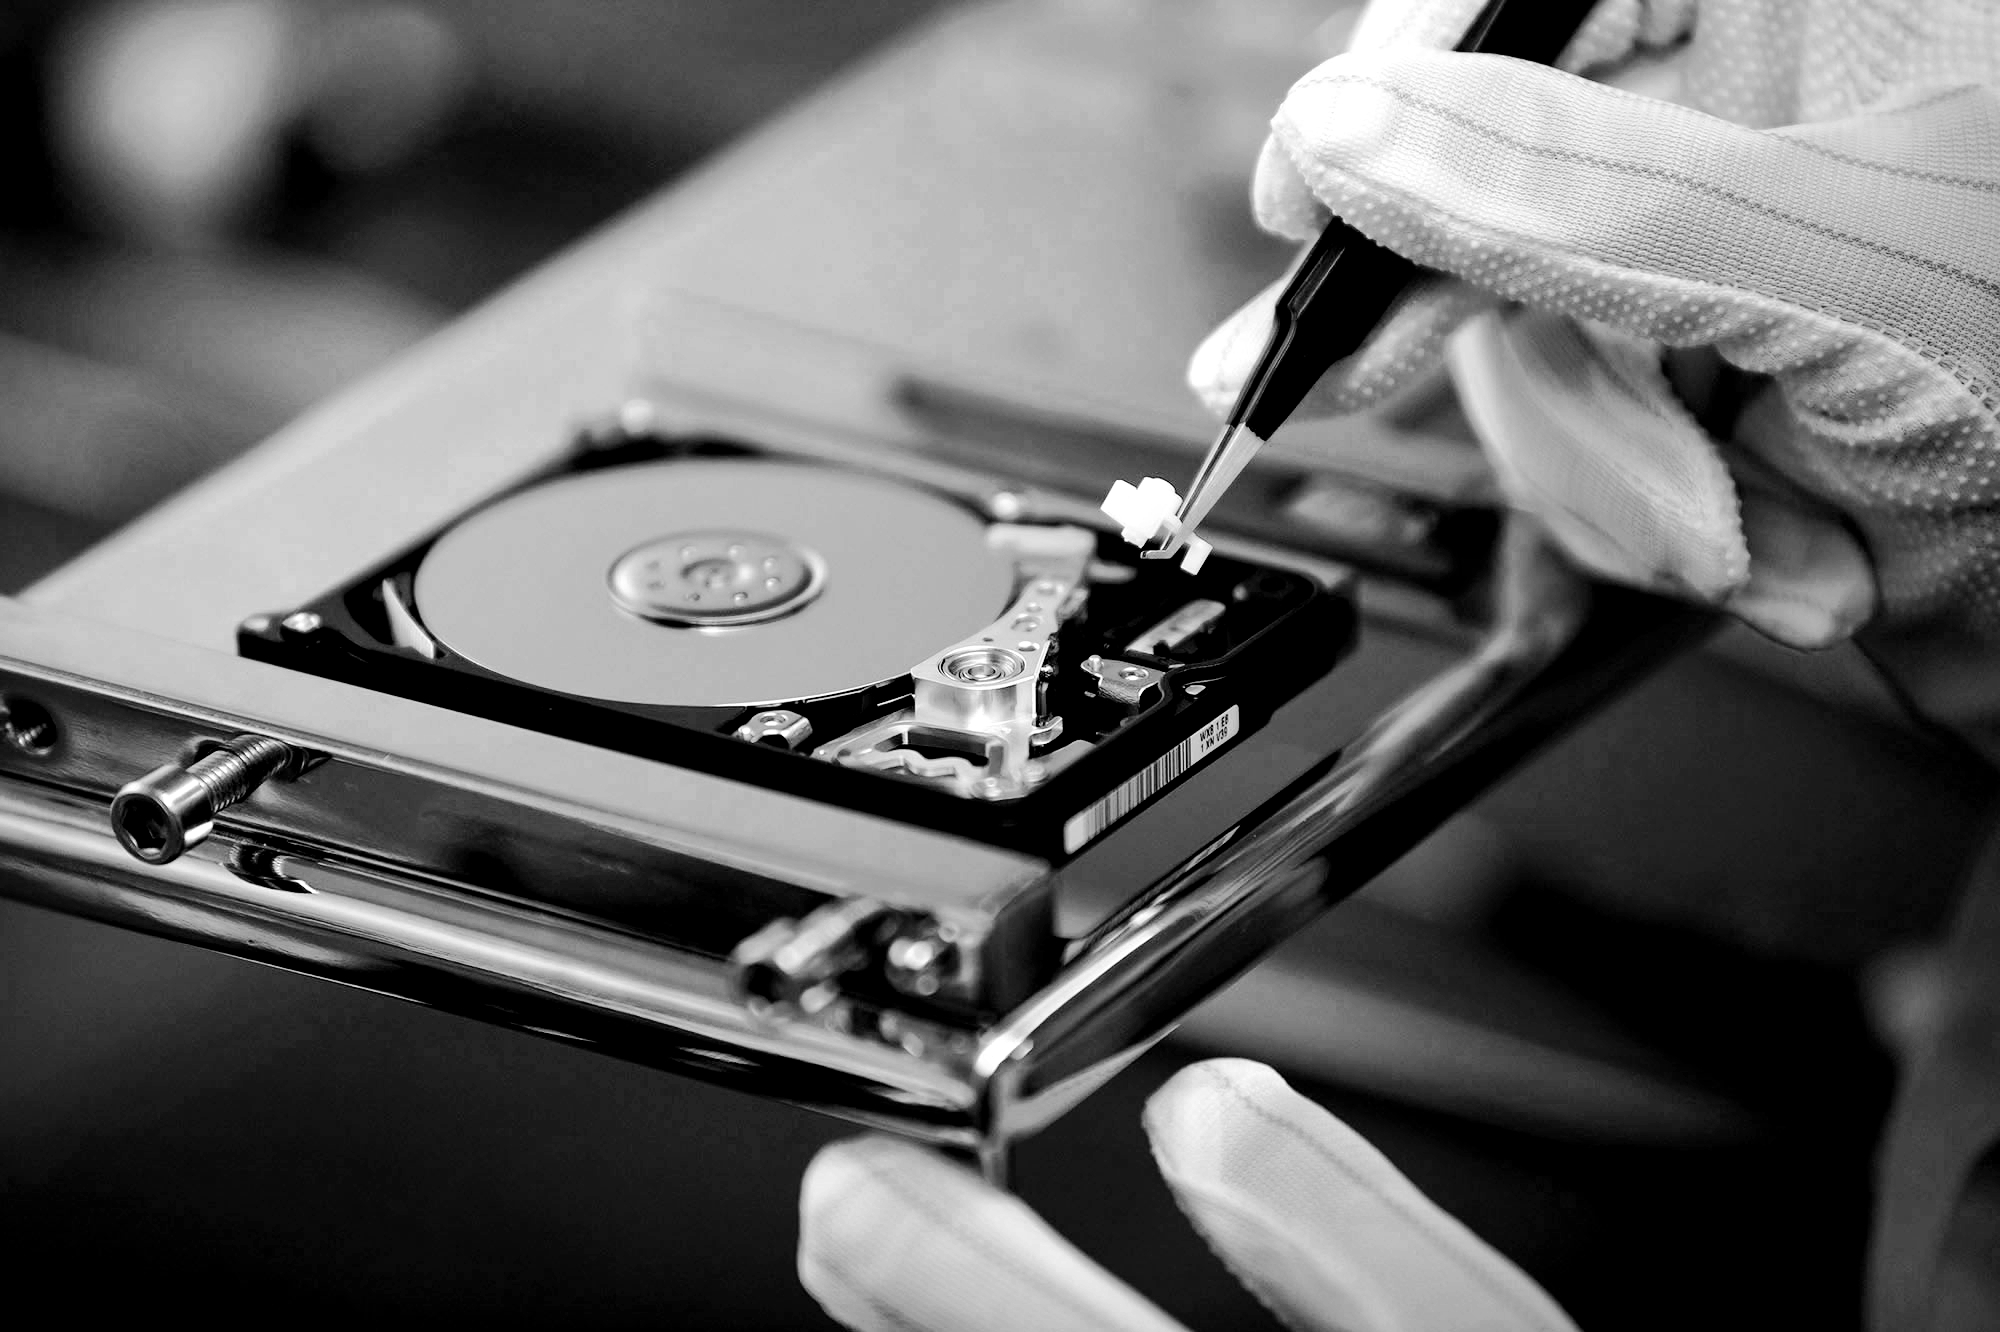 Data Recovery From Unrecognized External Drive On A Mac